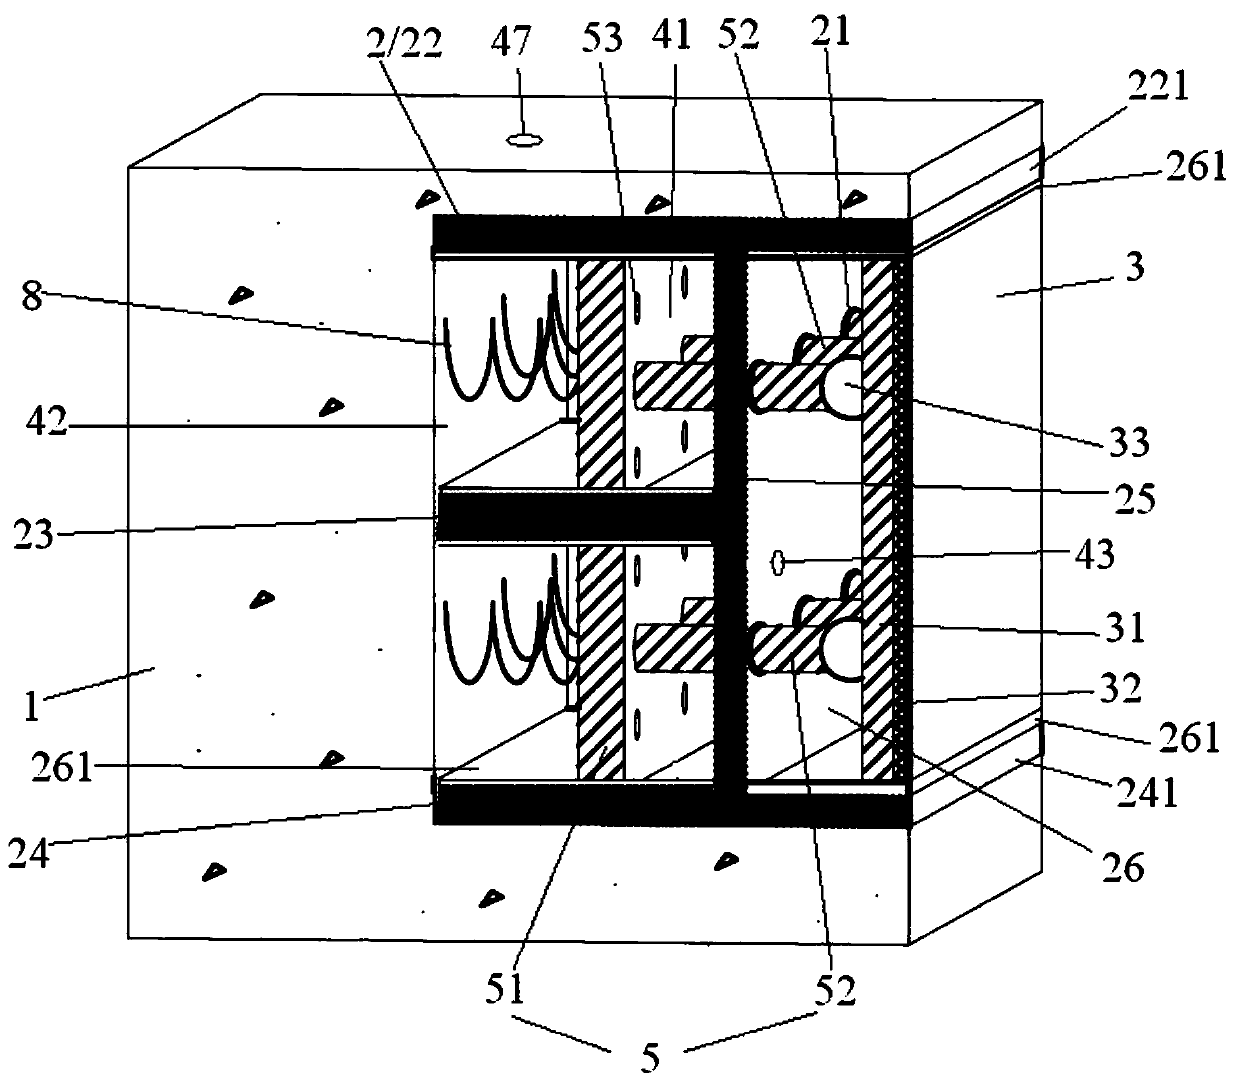 Self-adaptive deformation reset anti-collision method capable of resisting uneven impact force